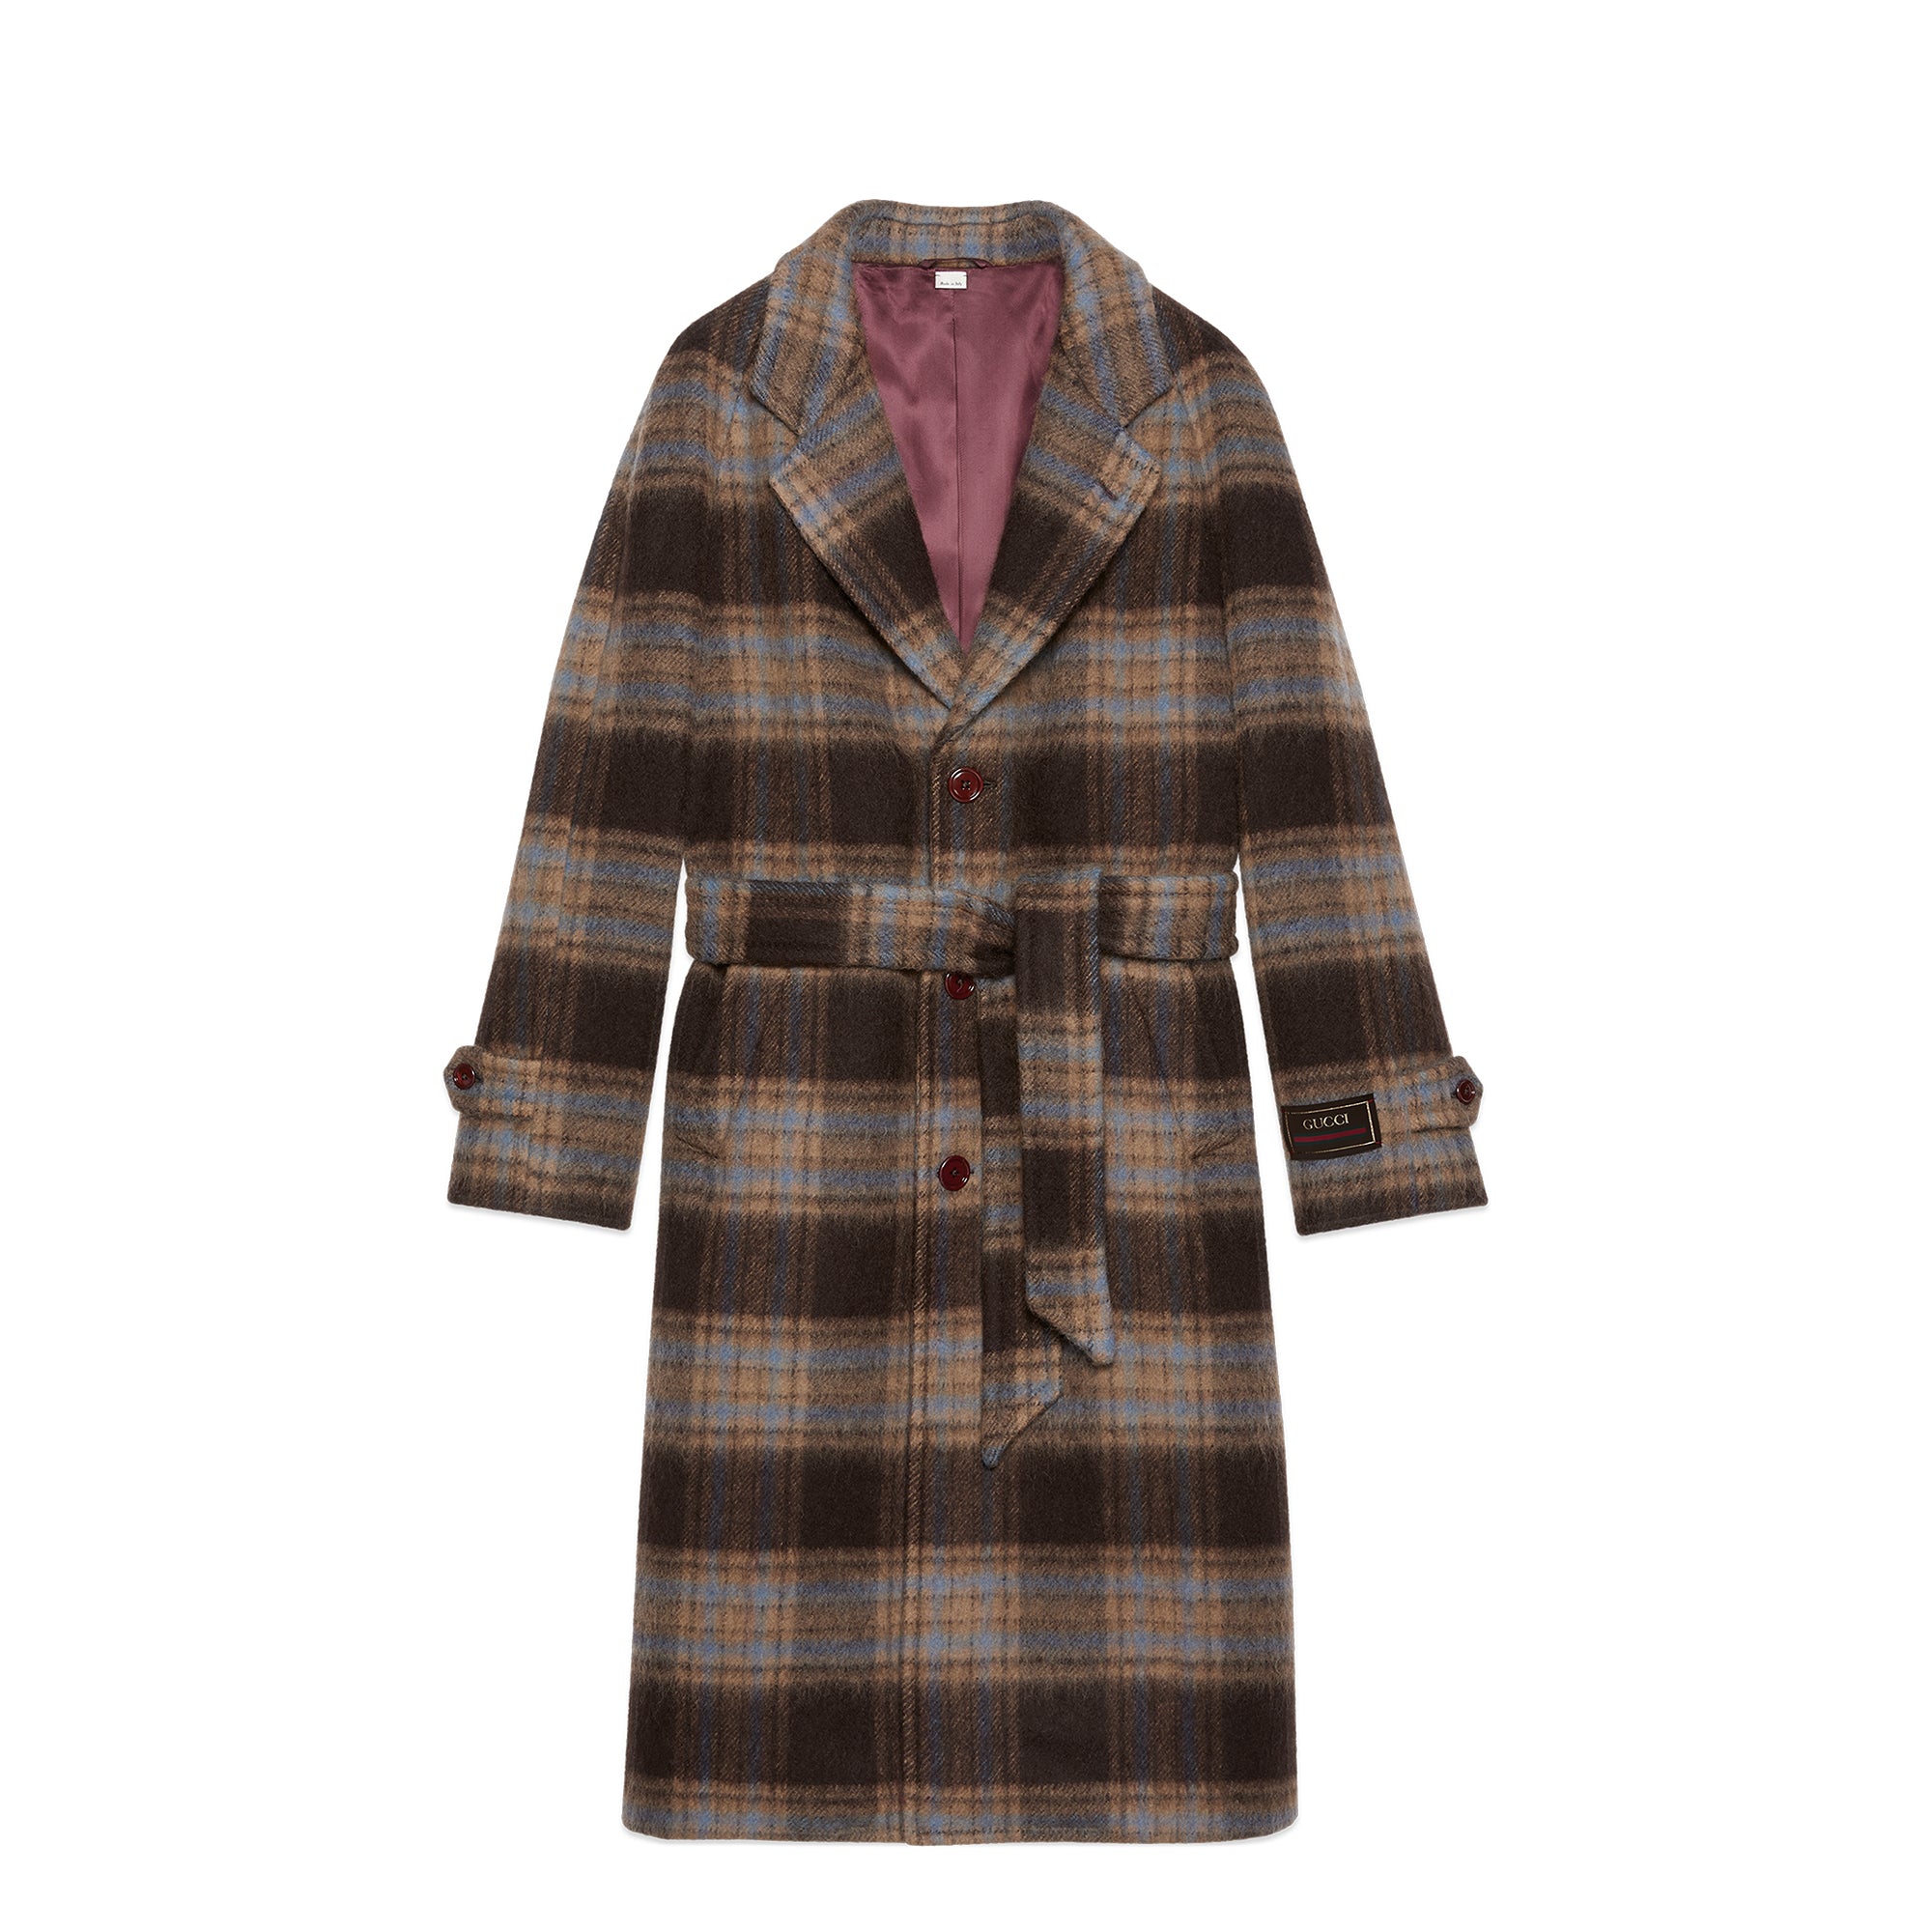 Gucci - Men’s Check Wool Coat With Gucci - Label - (Brown/Beige) view 1